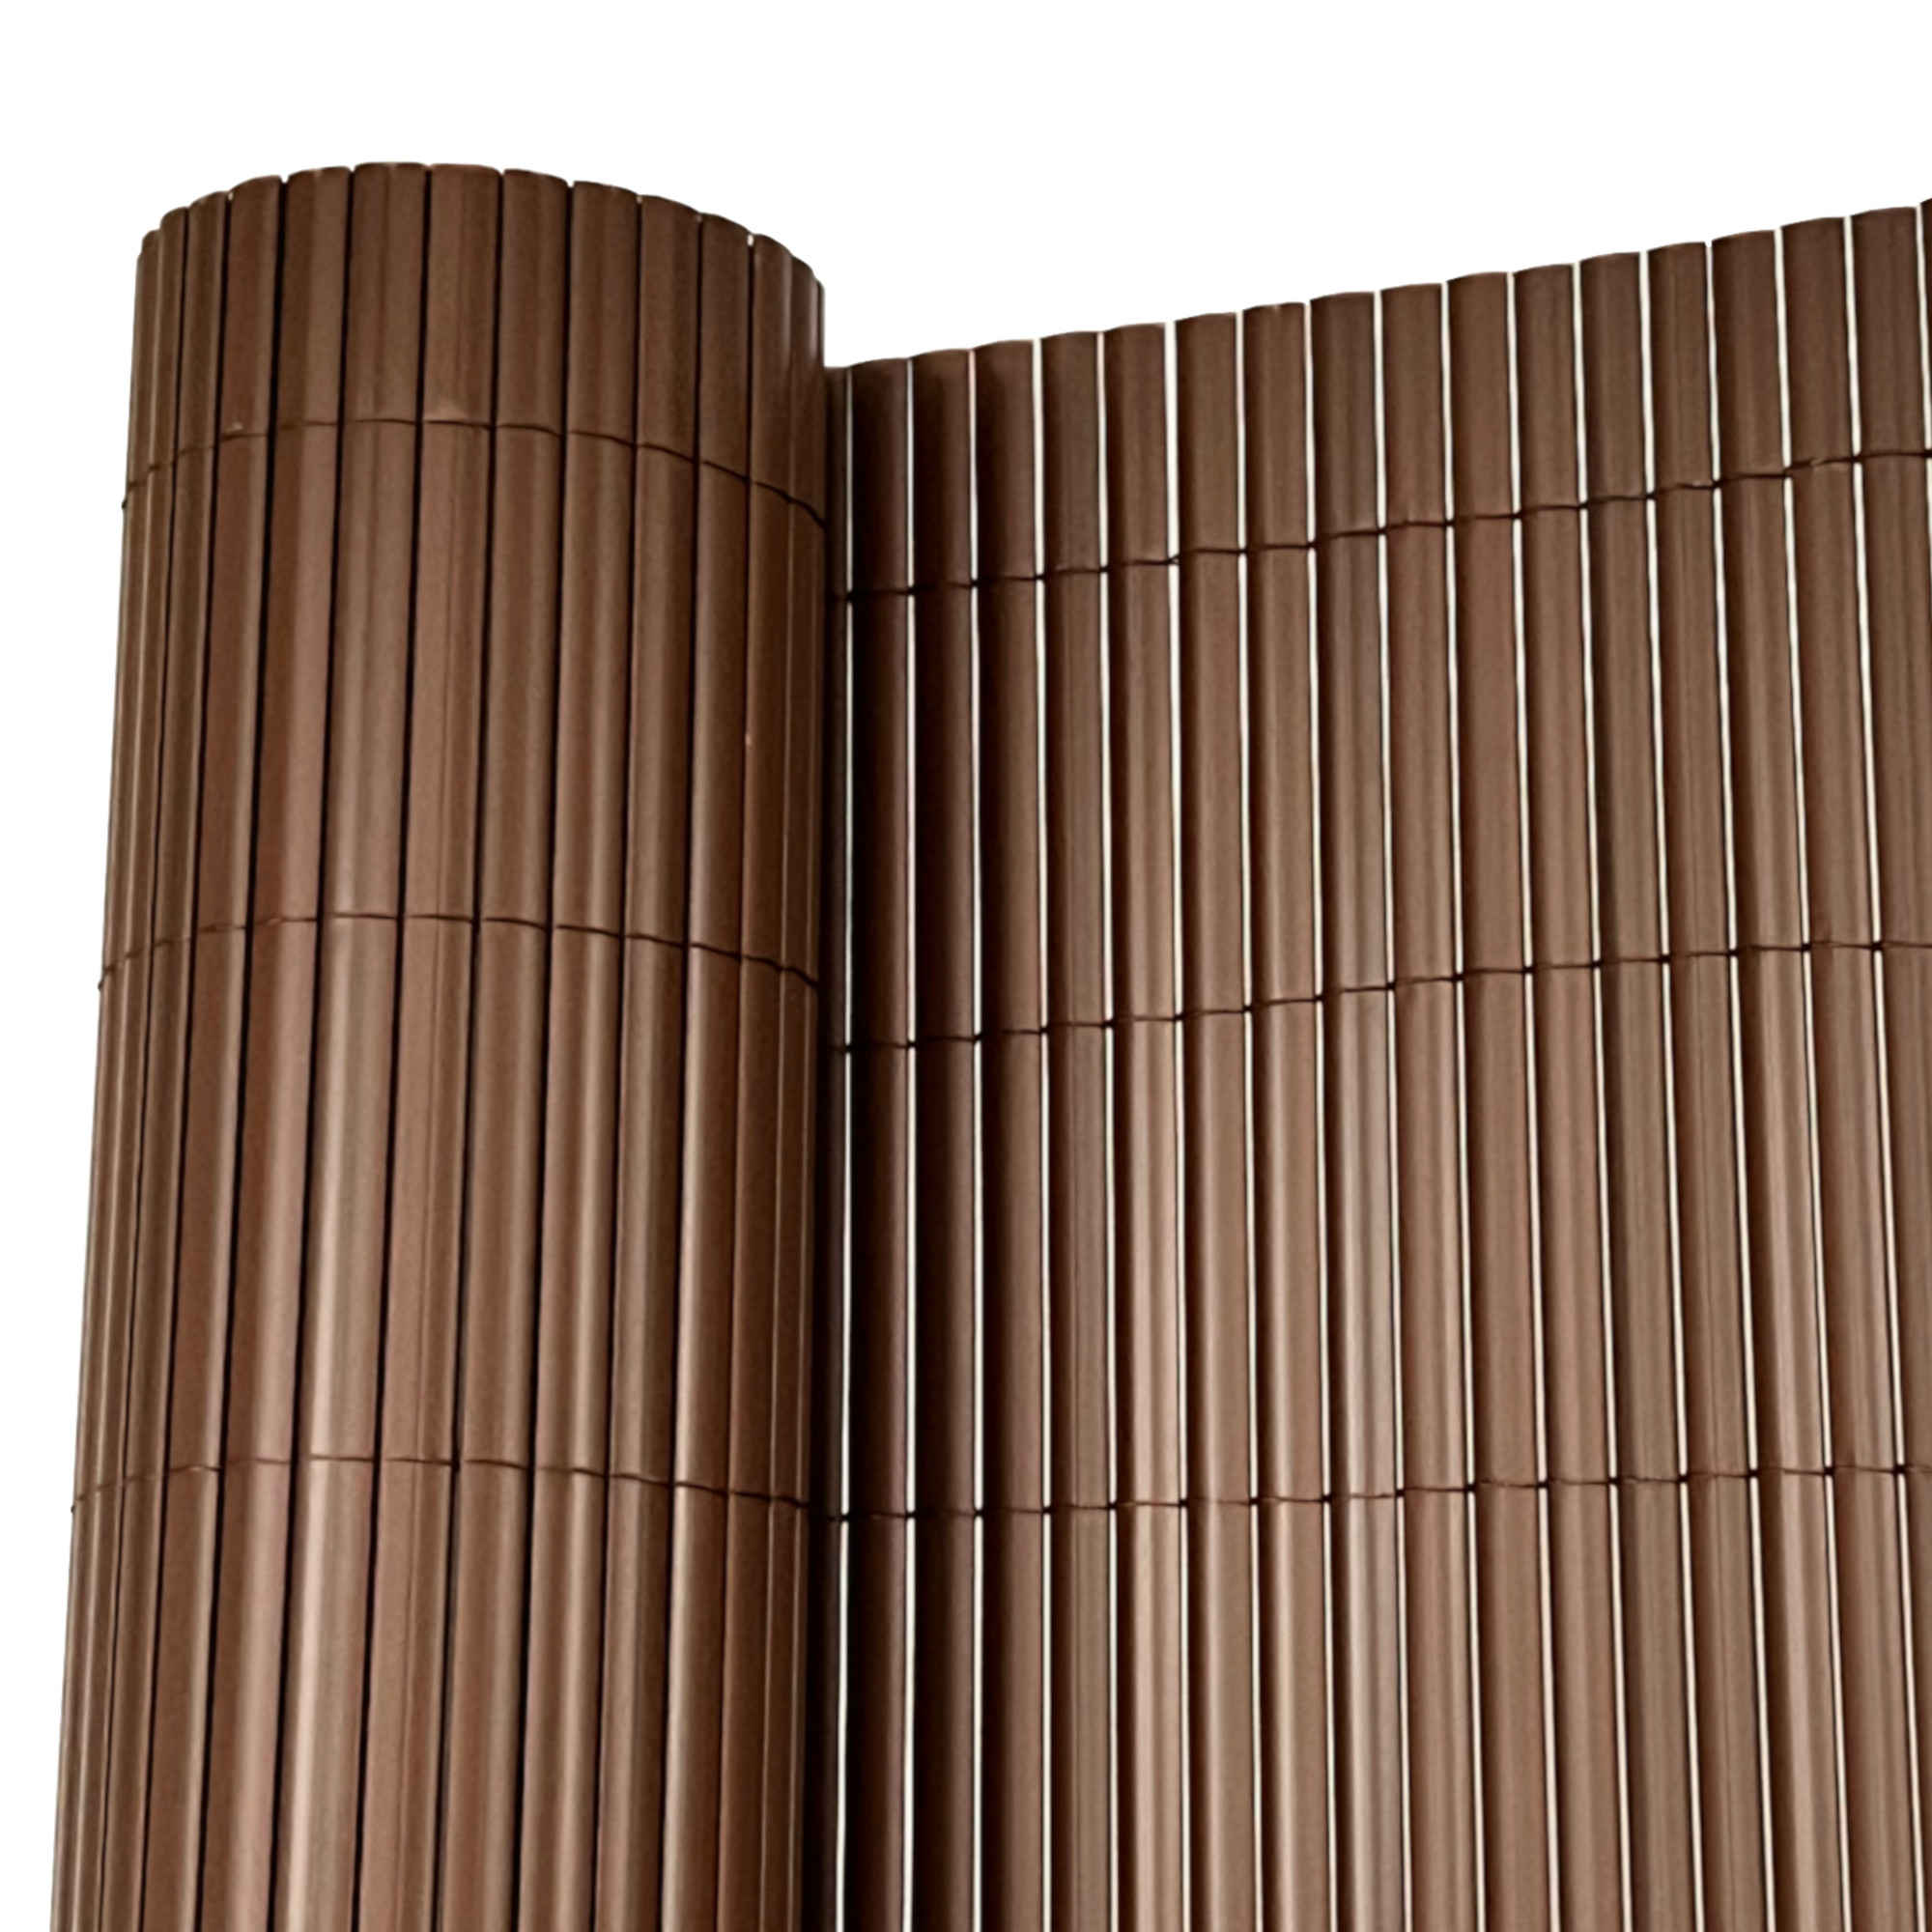 5m x 1.2m PVC Fencing (Brown) - Click Image to Close